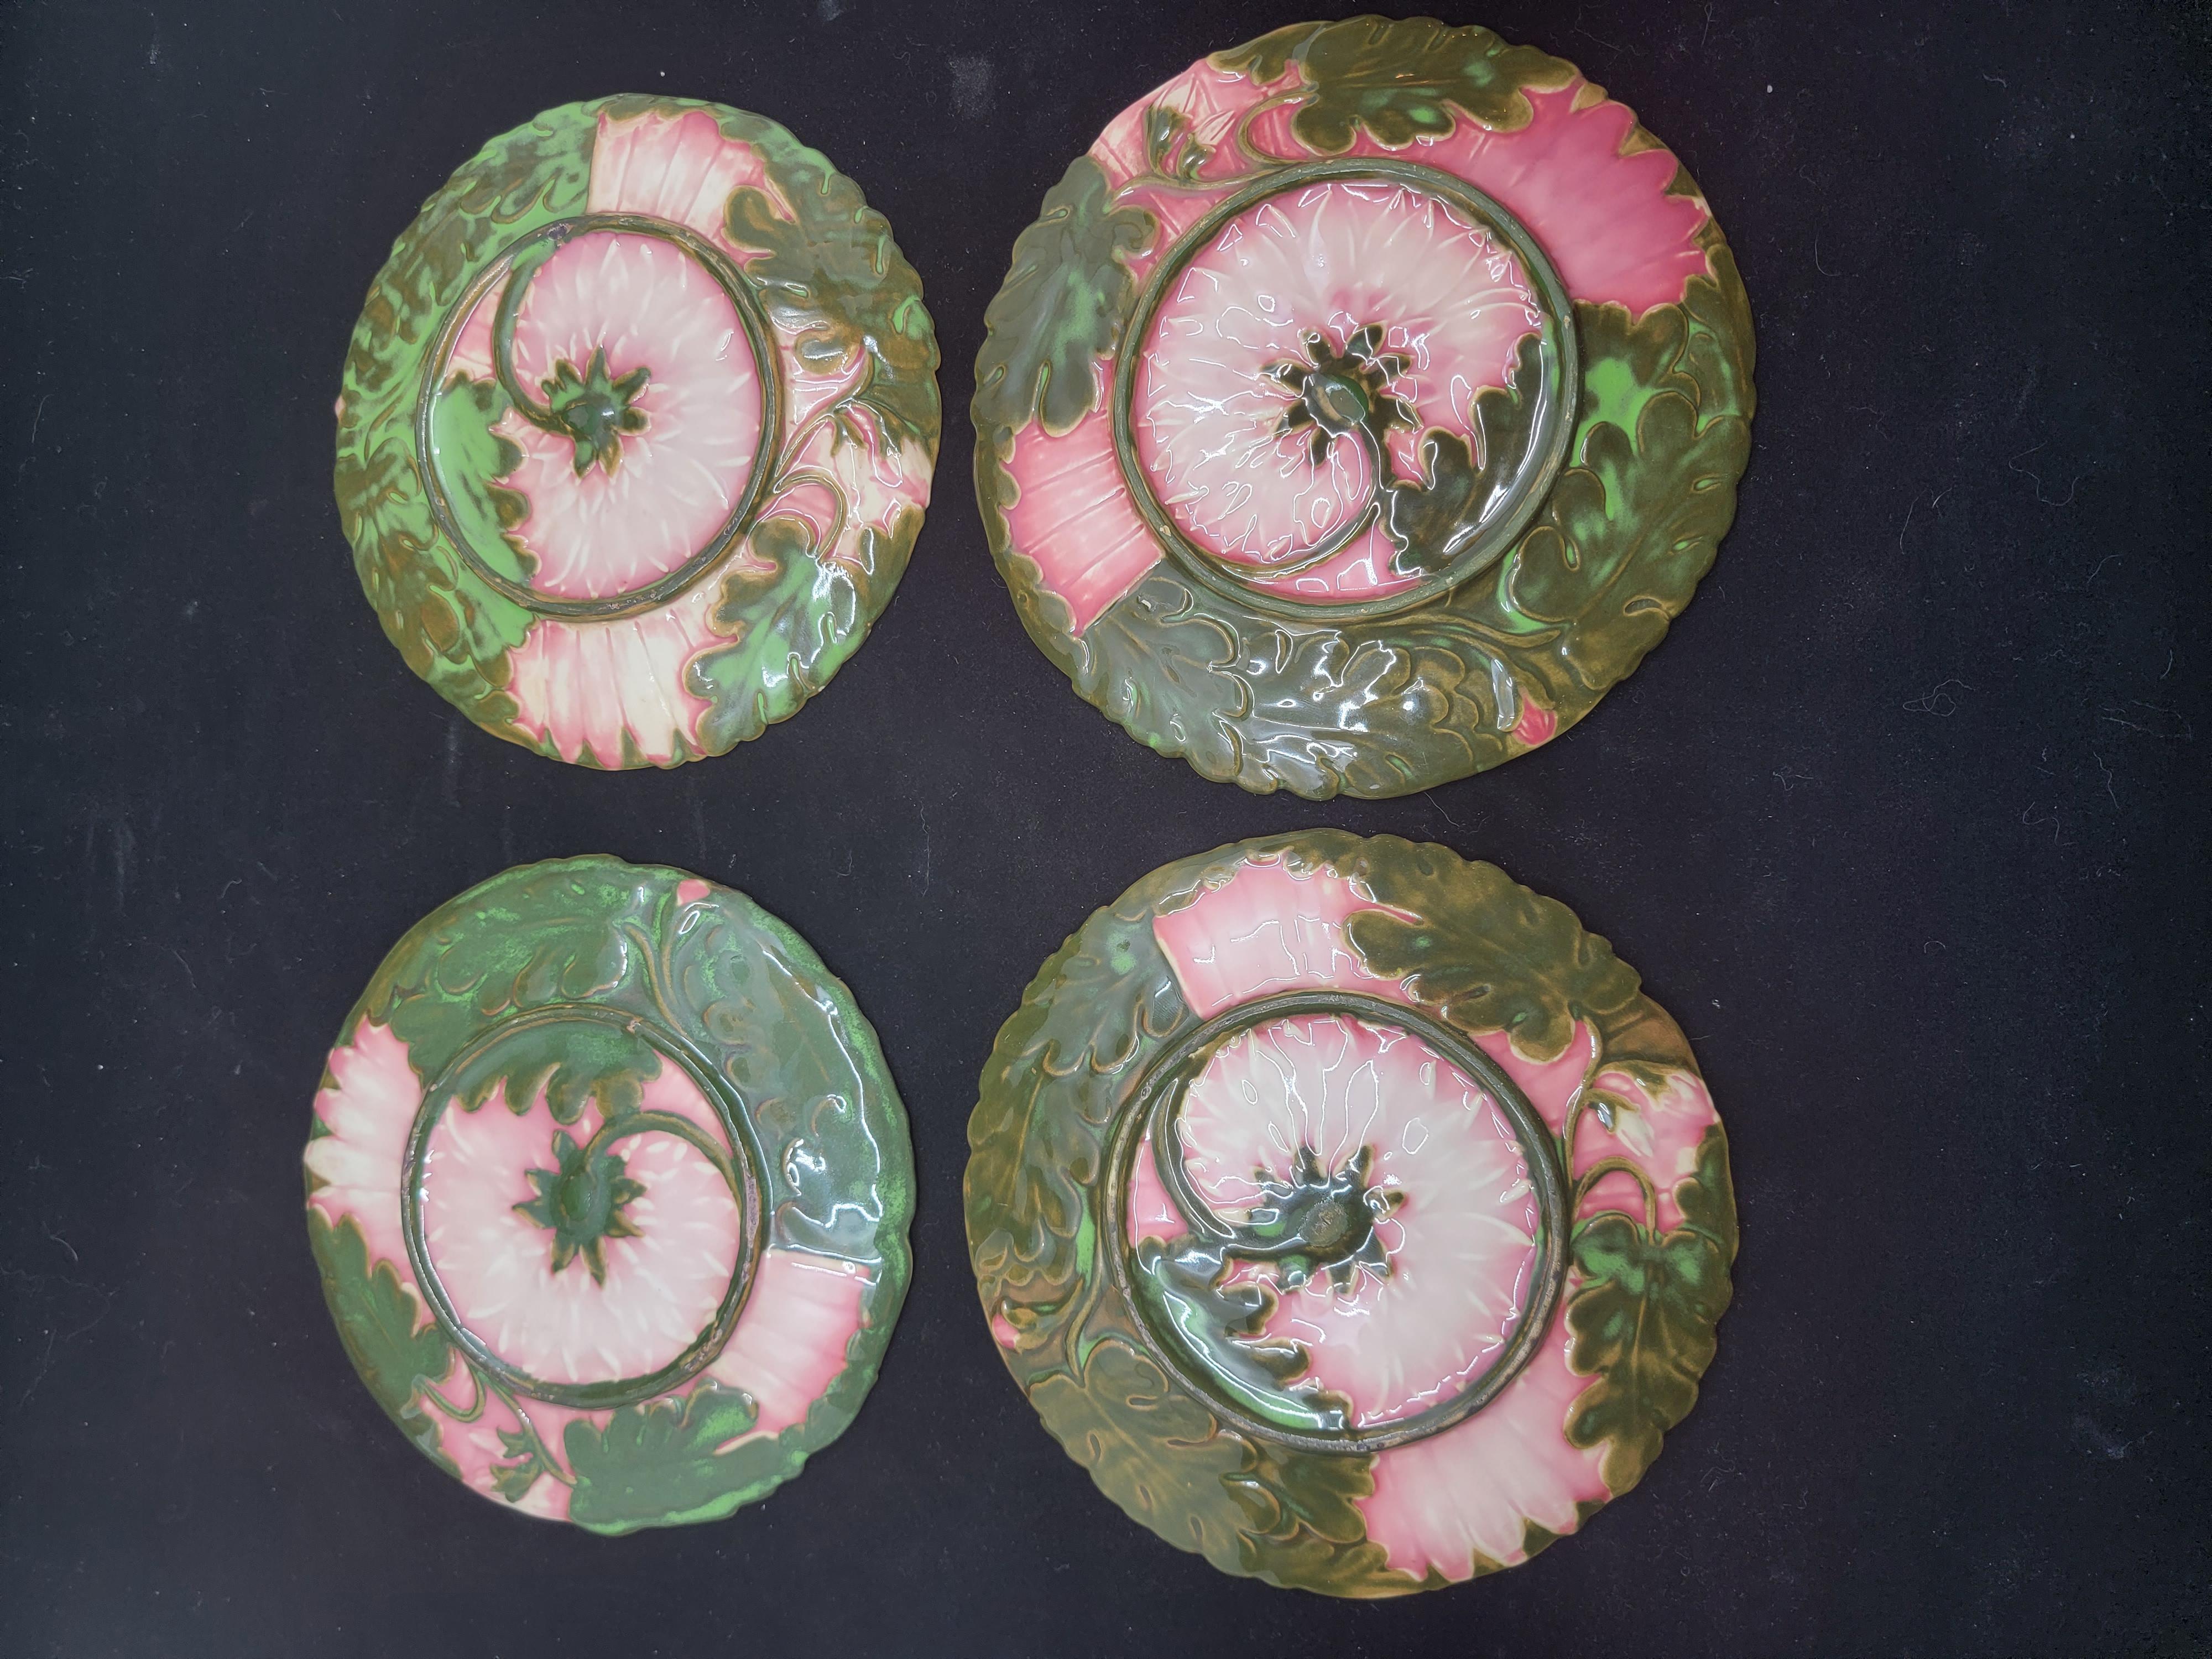 This is one of the rarest of majolica sets of dishes that I have come across. I enjoy small details . These four dishes represent the growing stages of a flower. They are graded in color. I have never seen that in a set before in all the years of